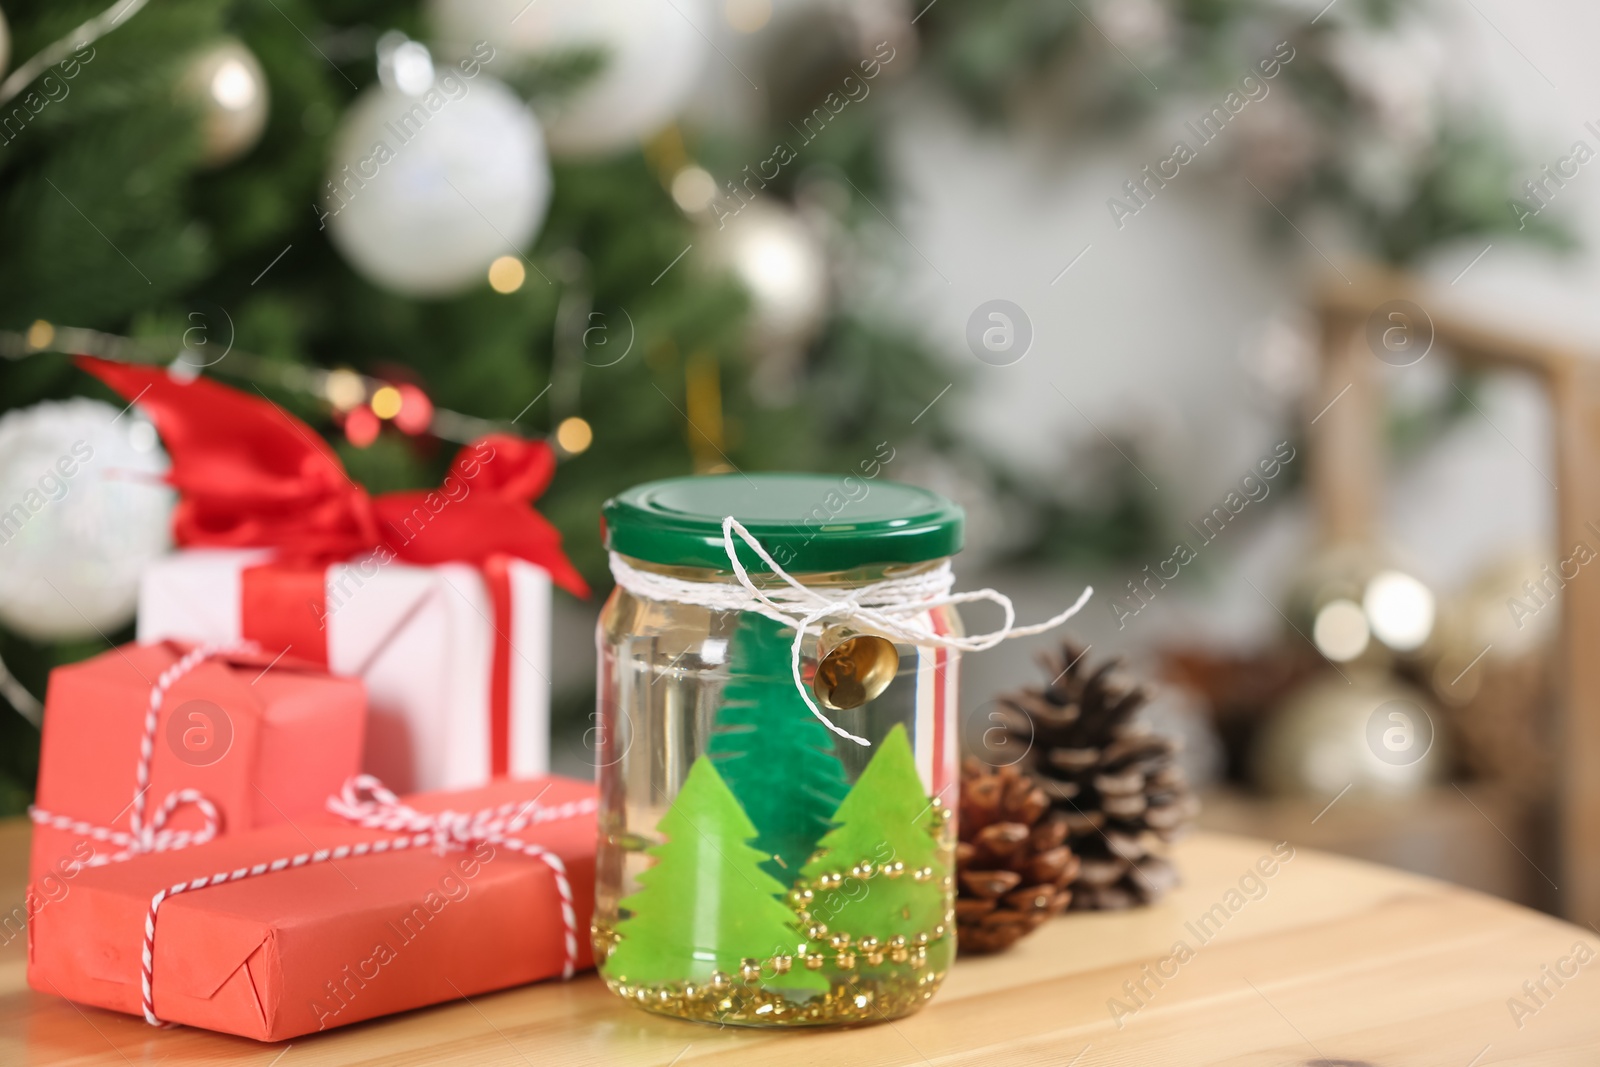 Photo of Handmade snow globe and Christmas decorations on wooden table